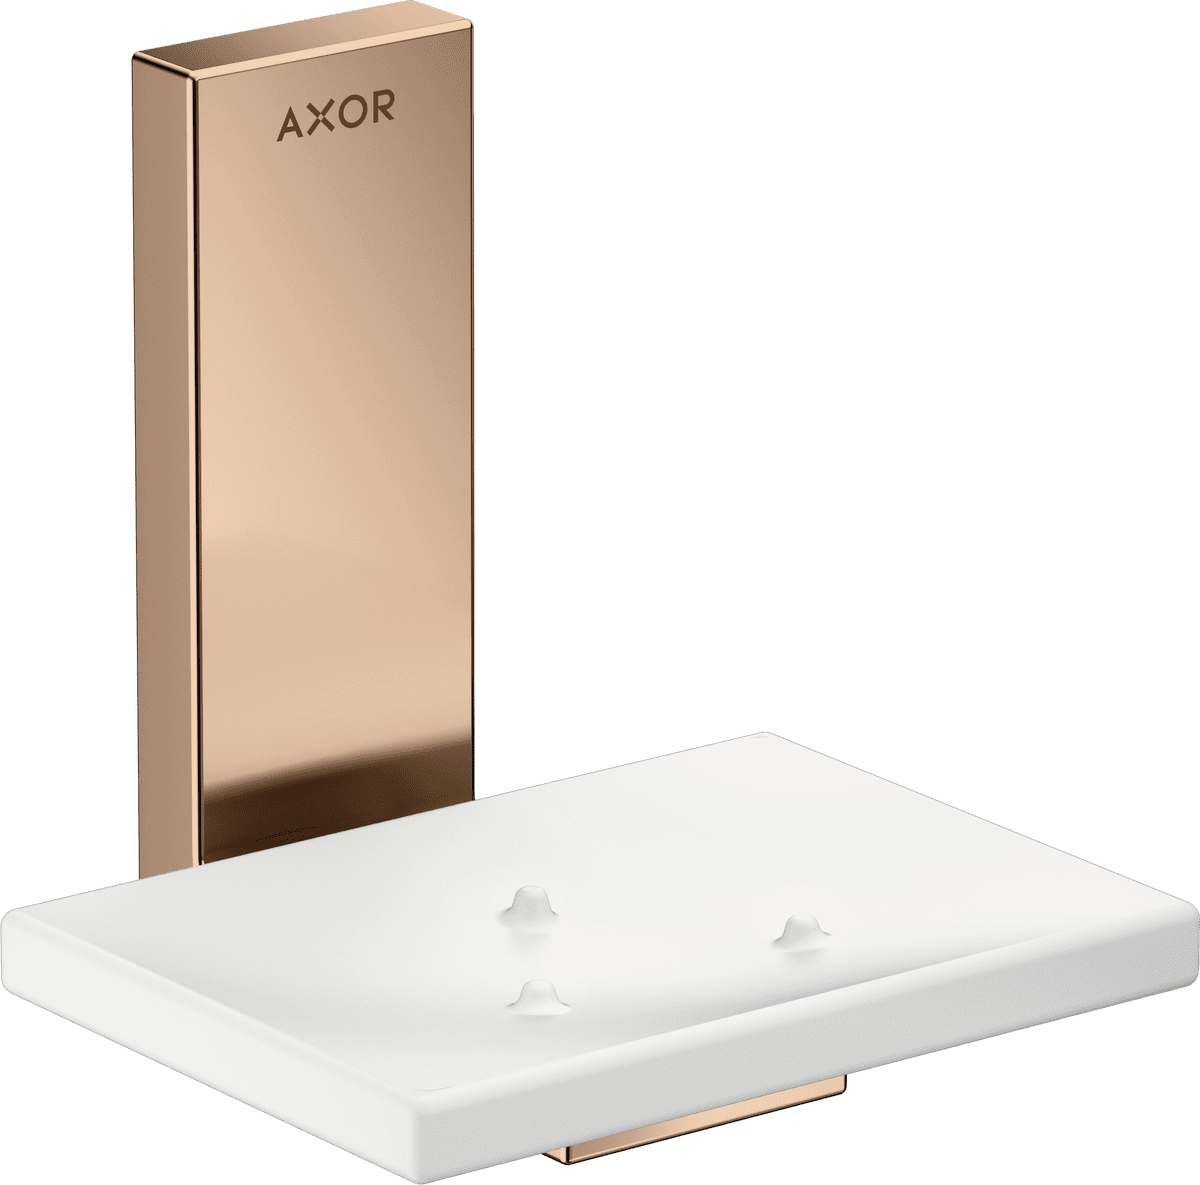 Picture of HANSGROHE AXOR Universal Rectangular Soap dish #42605300 - Polished Red Gold